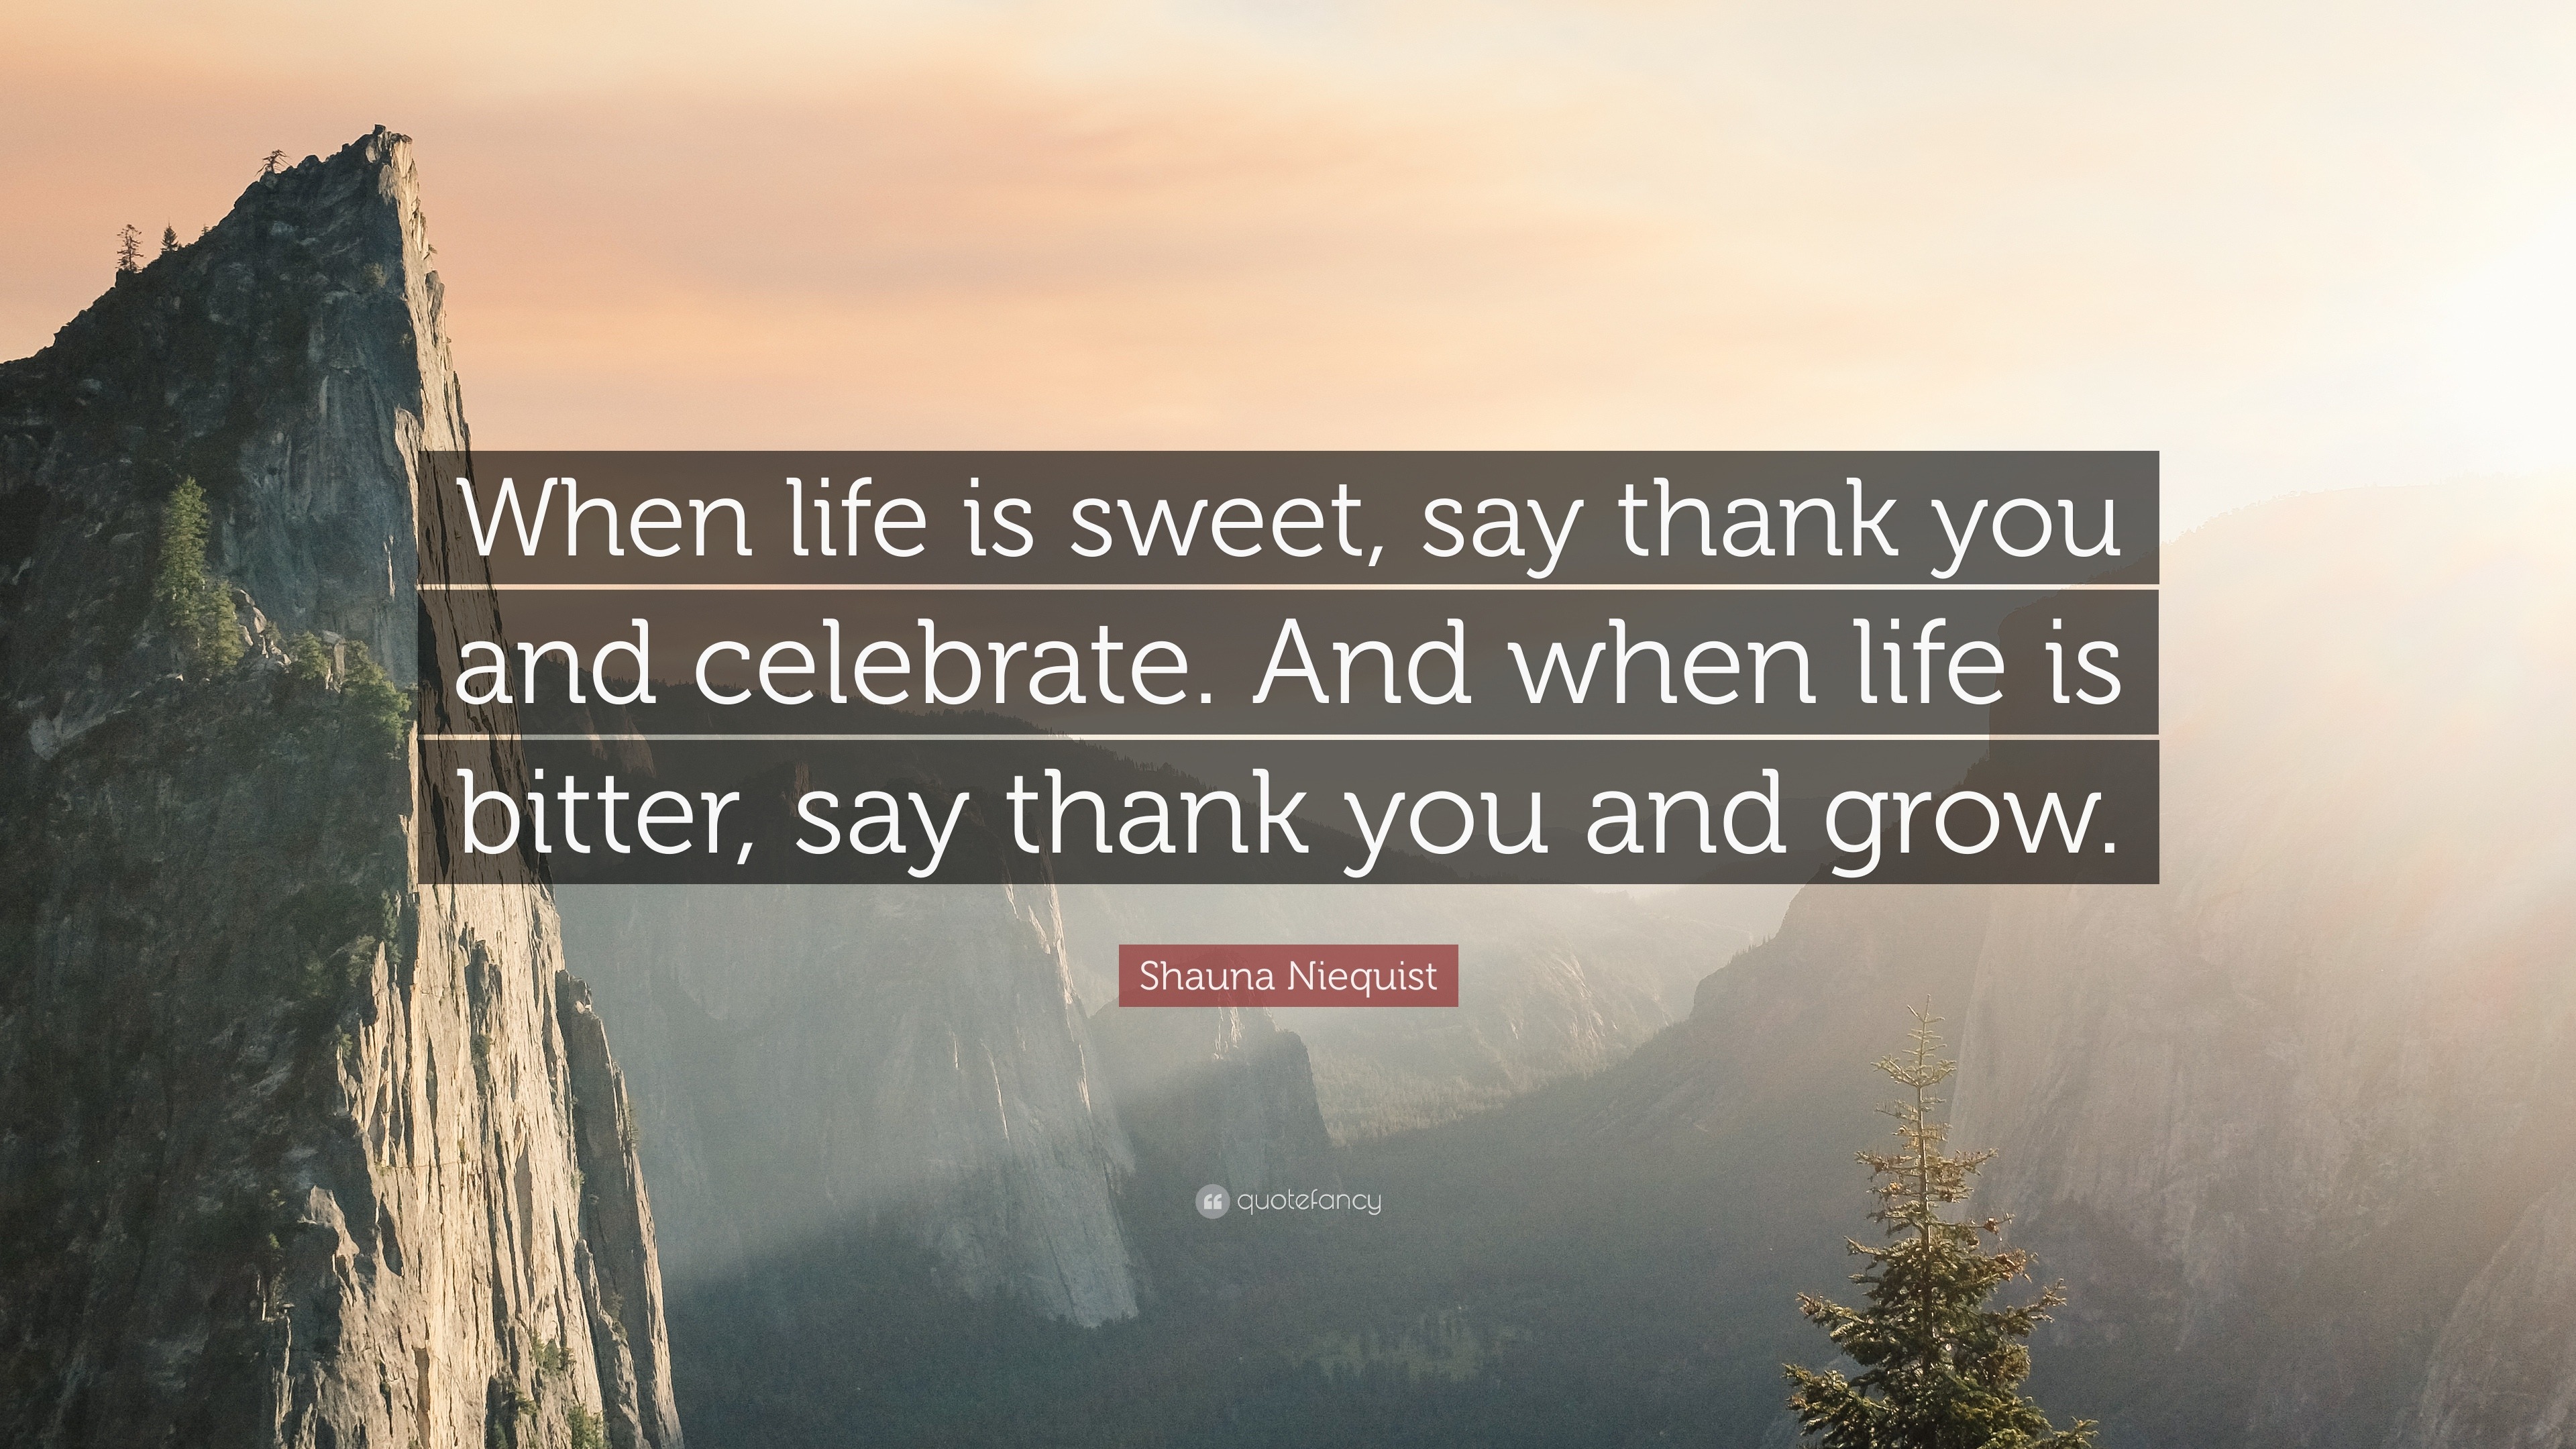 Shauna Niequist Quote “When life is sweet say thank you and celebrate